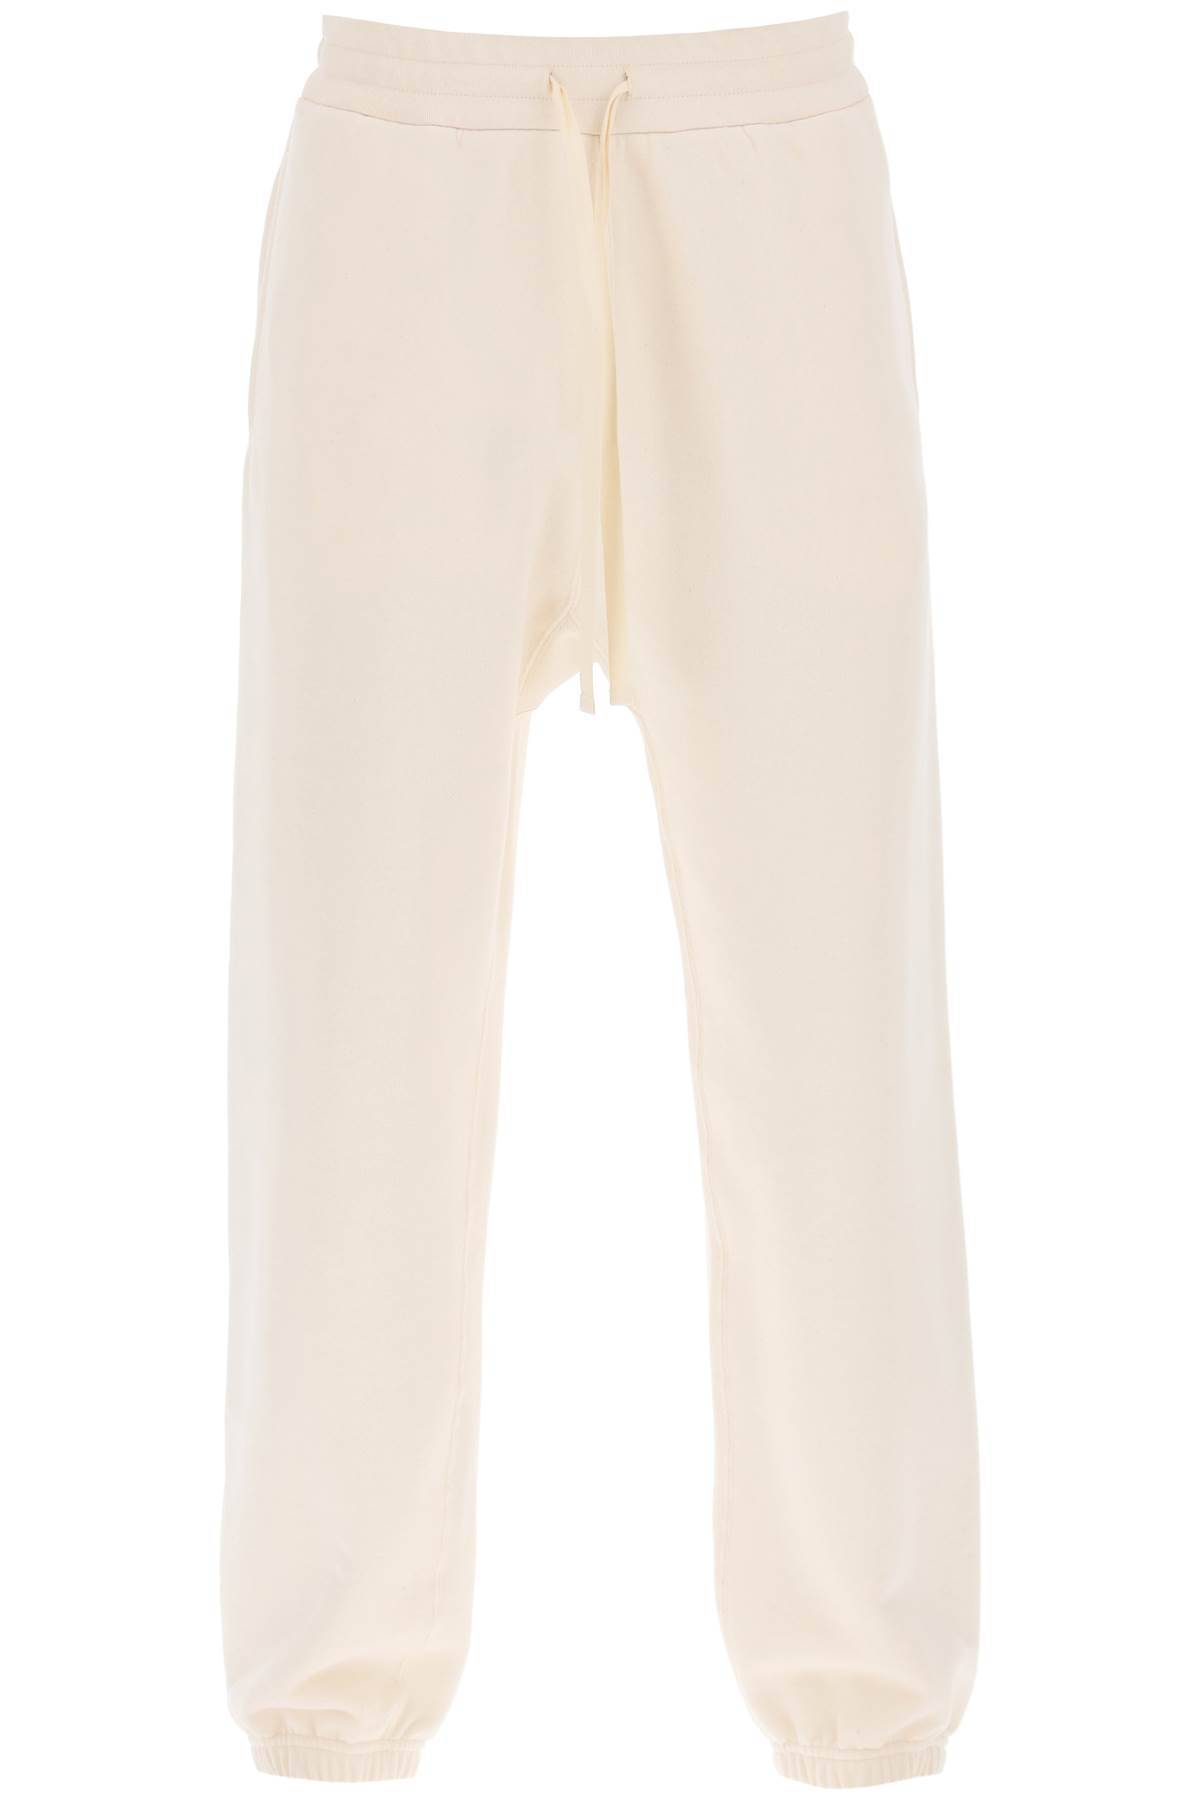 Jil Sander Compact Cotton Terry Sweatpants In White